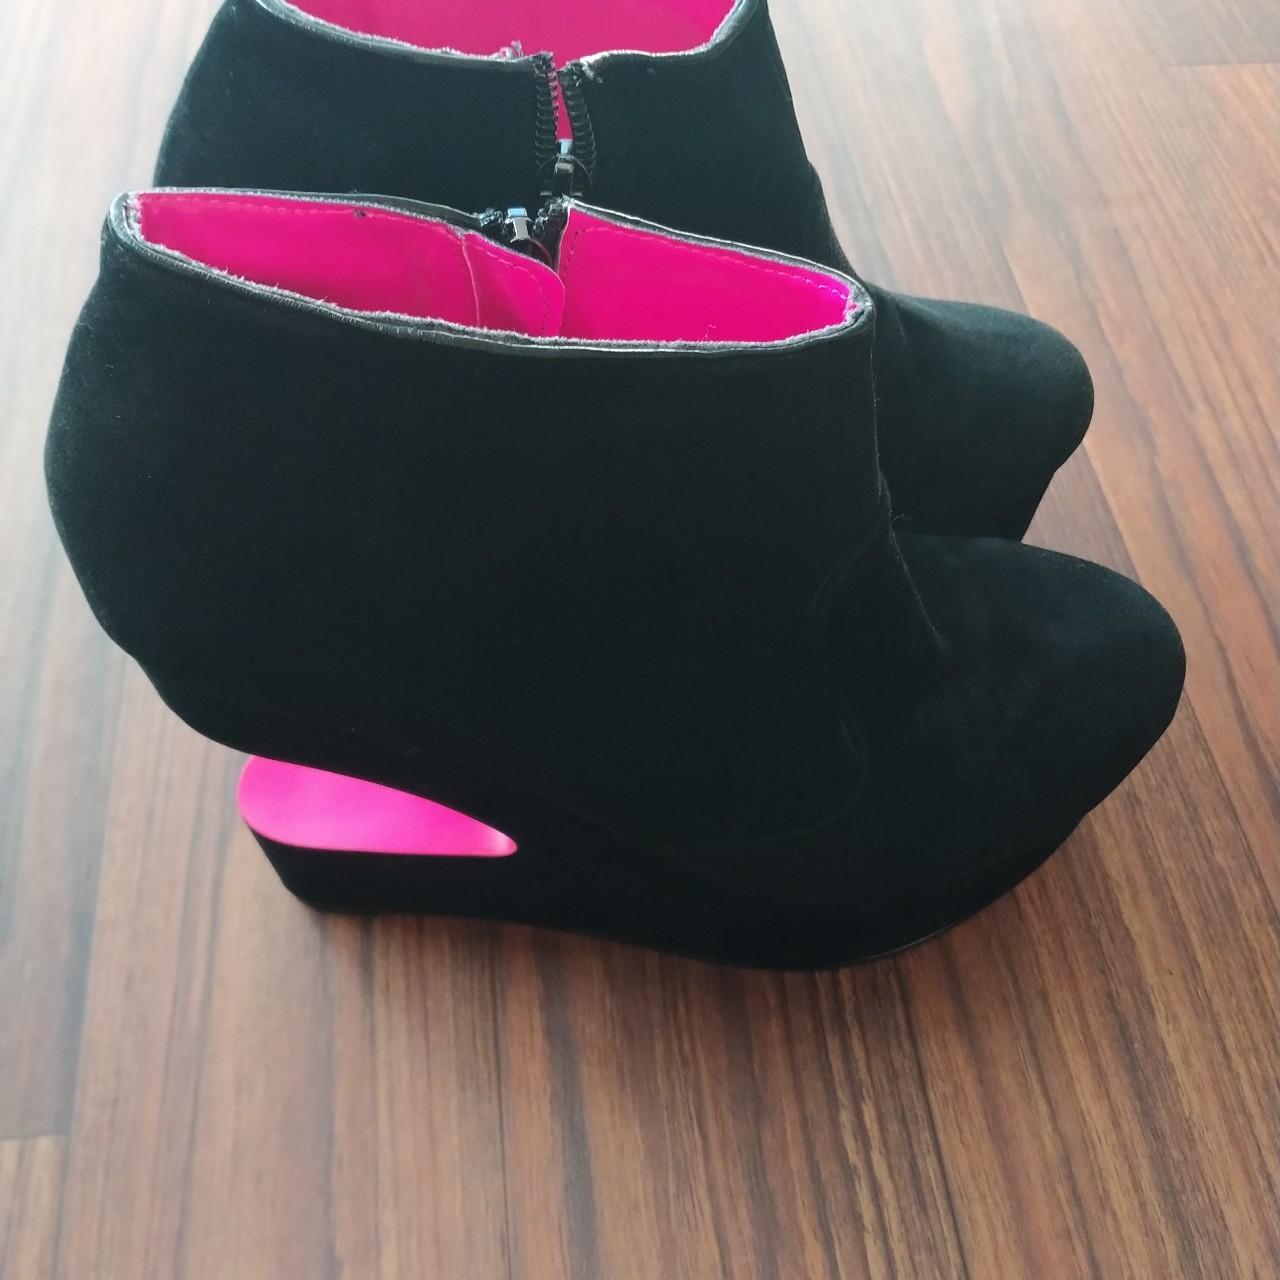 Product Image 1 - Women's black wedges with pink